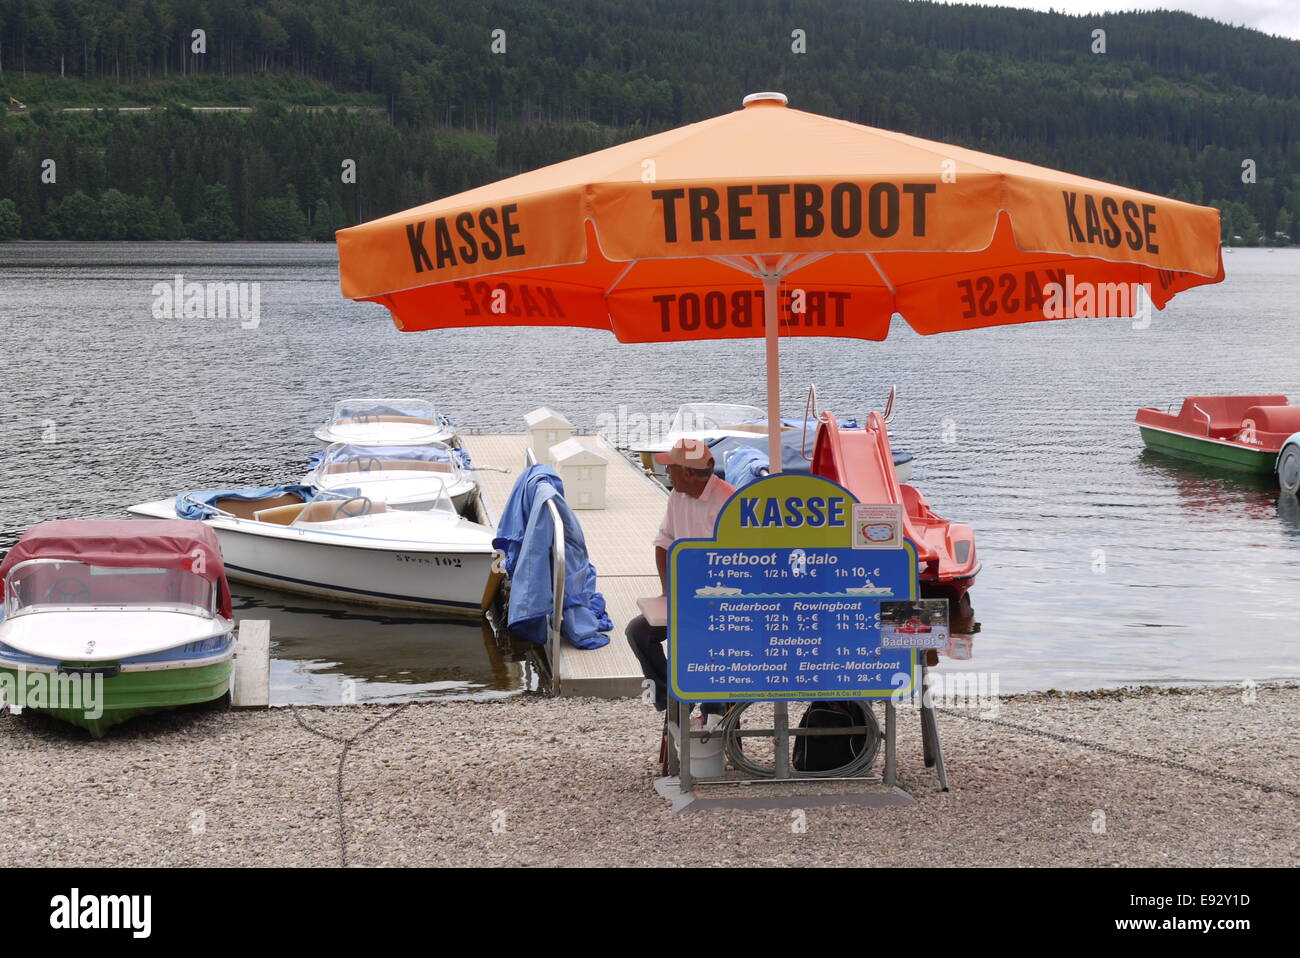 Boot- und Tretboot-Vermietung am Titisee, Boat renter lender at Lake Titi Stock Photo